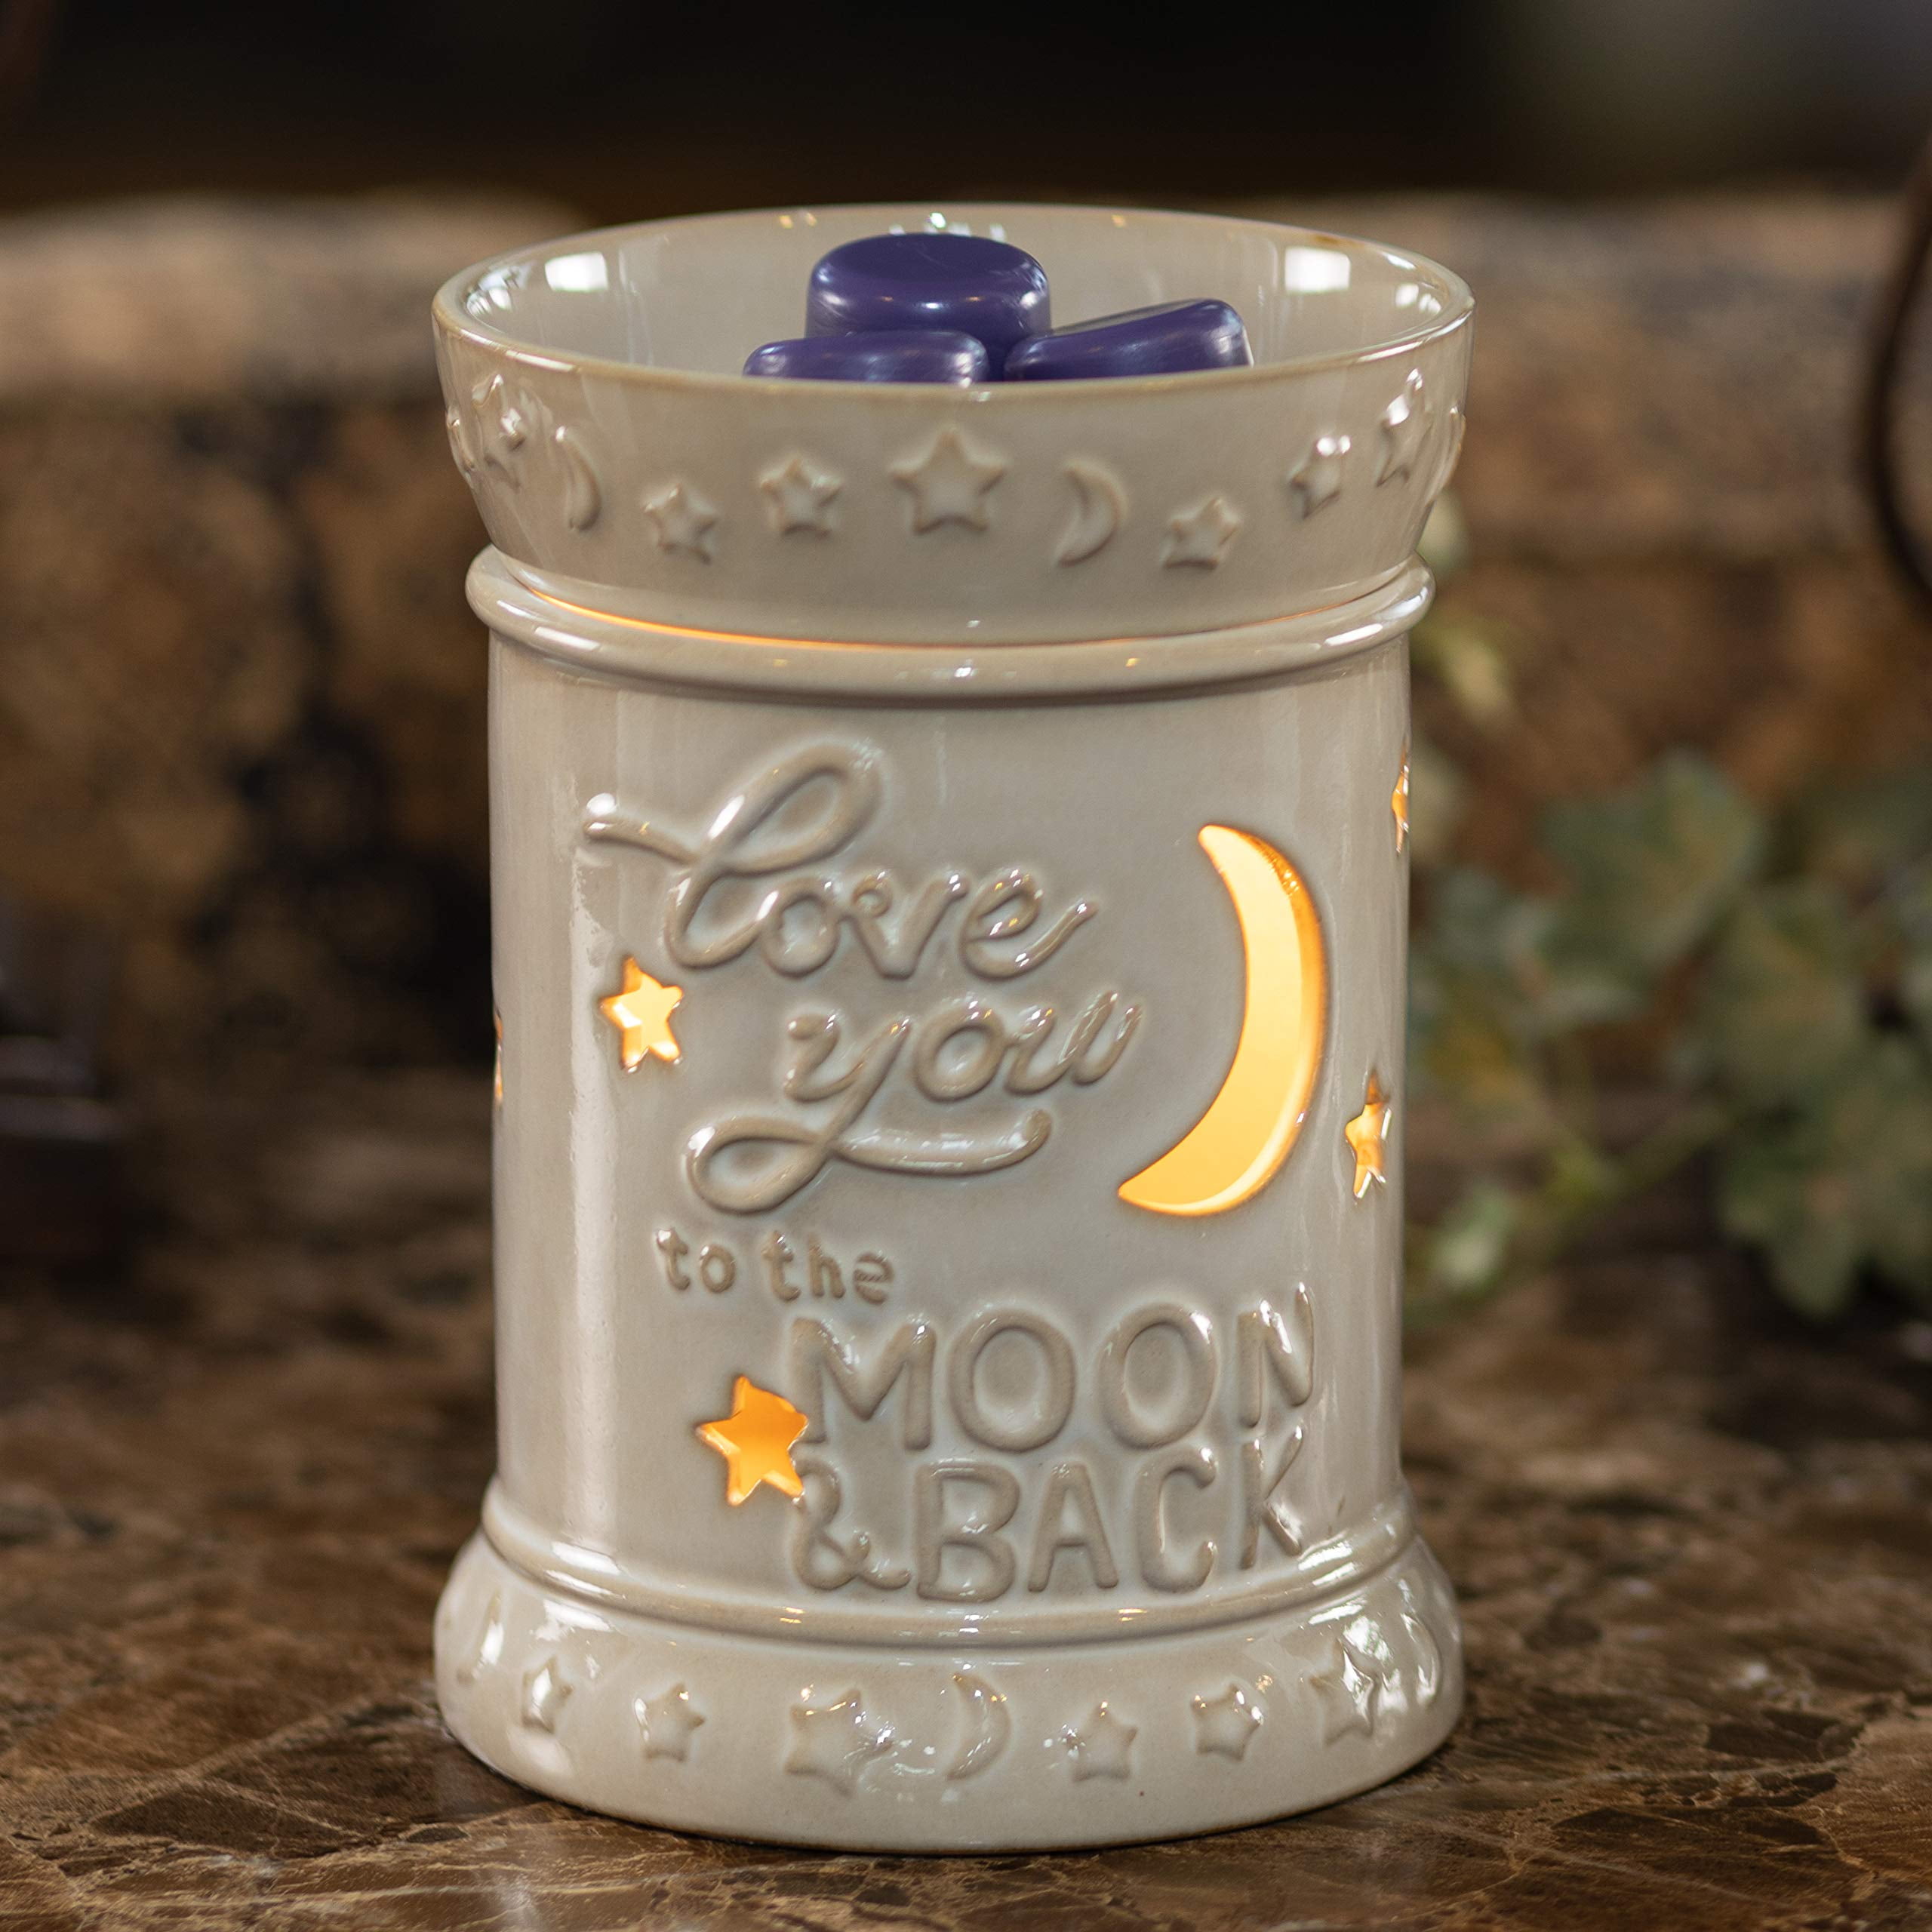 In love with my new @Scentsy wax warmer I preordered last year and it